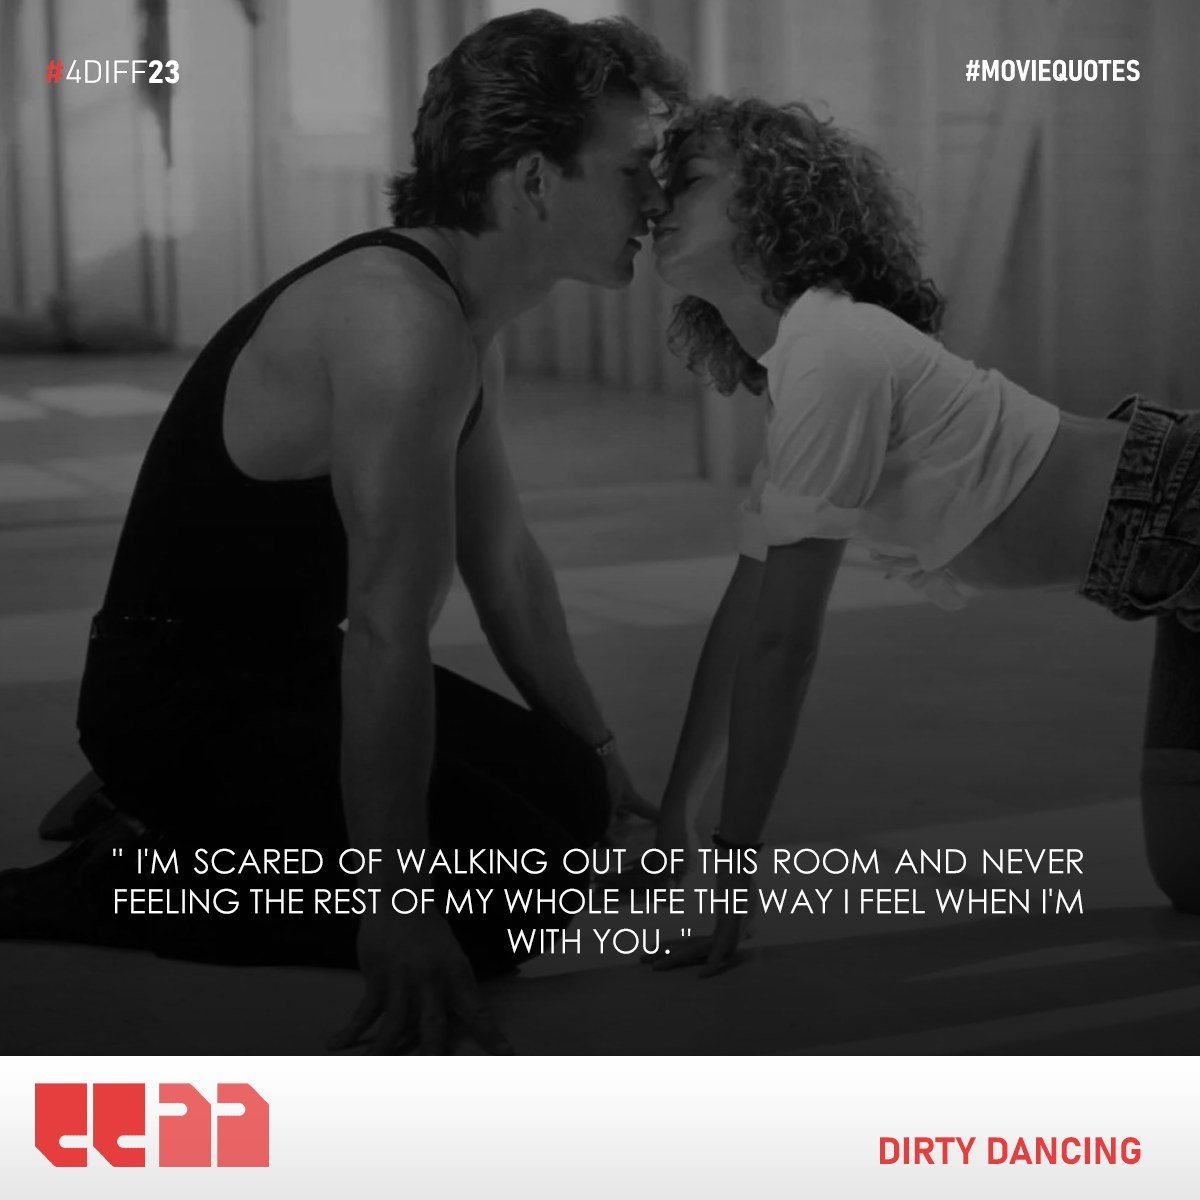 'I'm scared of walking out of this room and never feeling the rest of my whole life the way I feel when I'm with you.' —Dirty Dancing

#MovieQuotes #Quotes #DirtyDancing #FDIFF #fdiff2024 @FilmFreeway